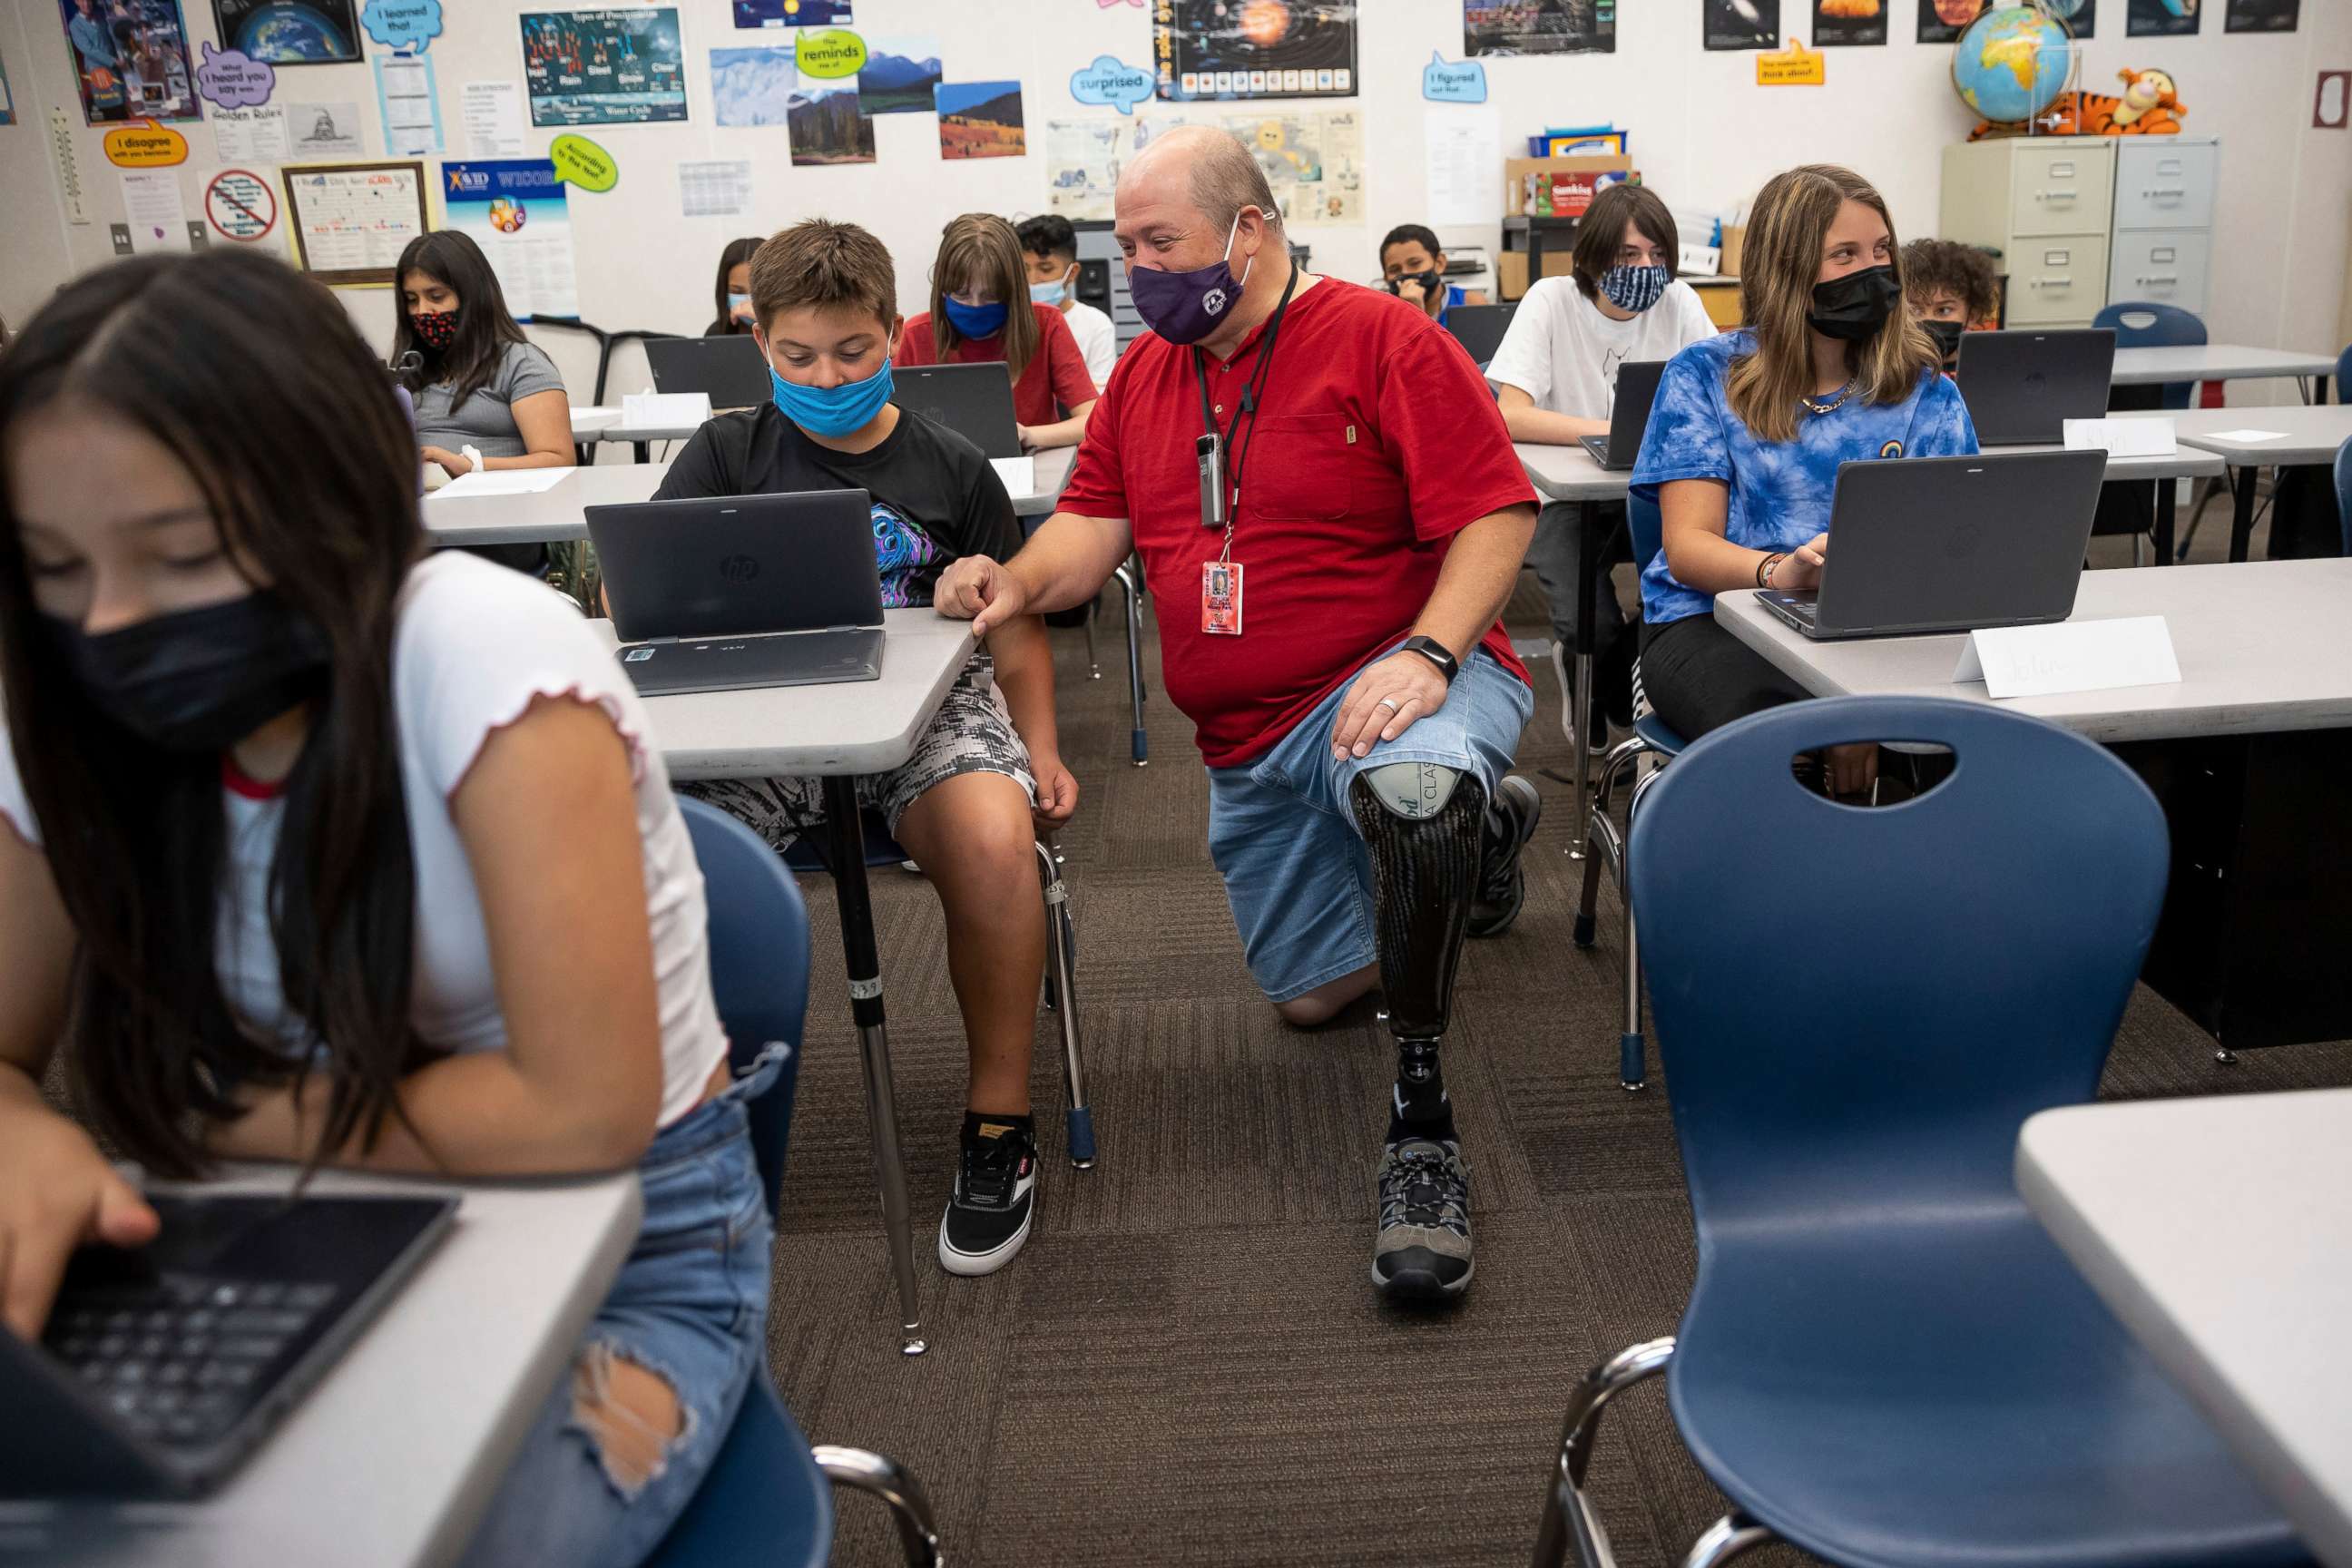 PHOTO: Bill Coleman, a sixth grade teacher, speaks with Jerry Oyler during class at Nibley Park School in Salt Lake City on Tuesday, Aug. 24, 2021.